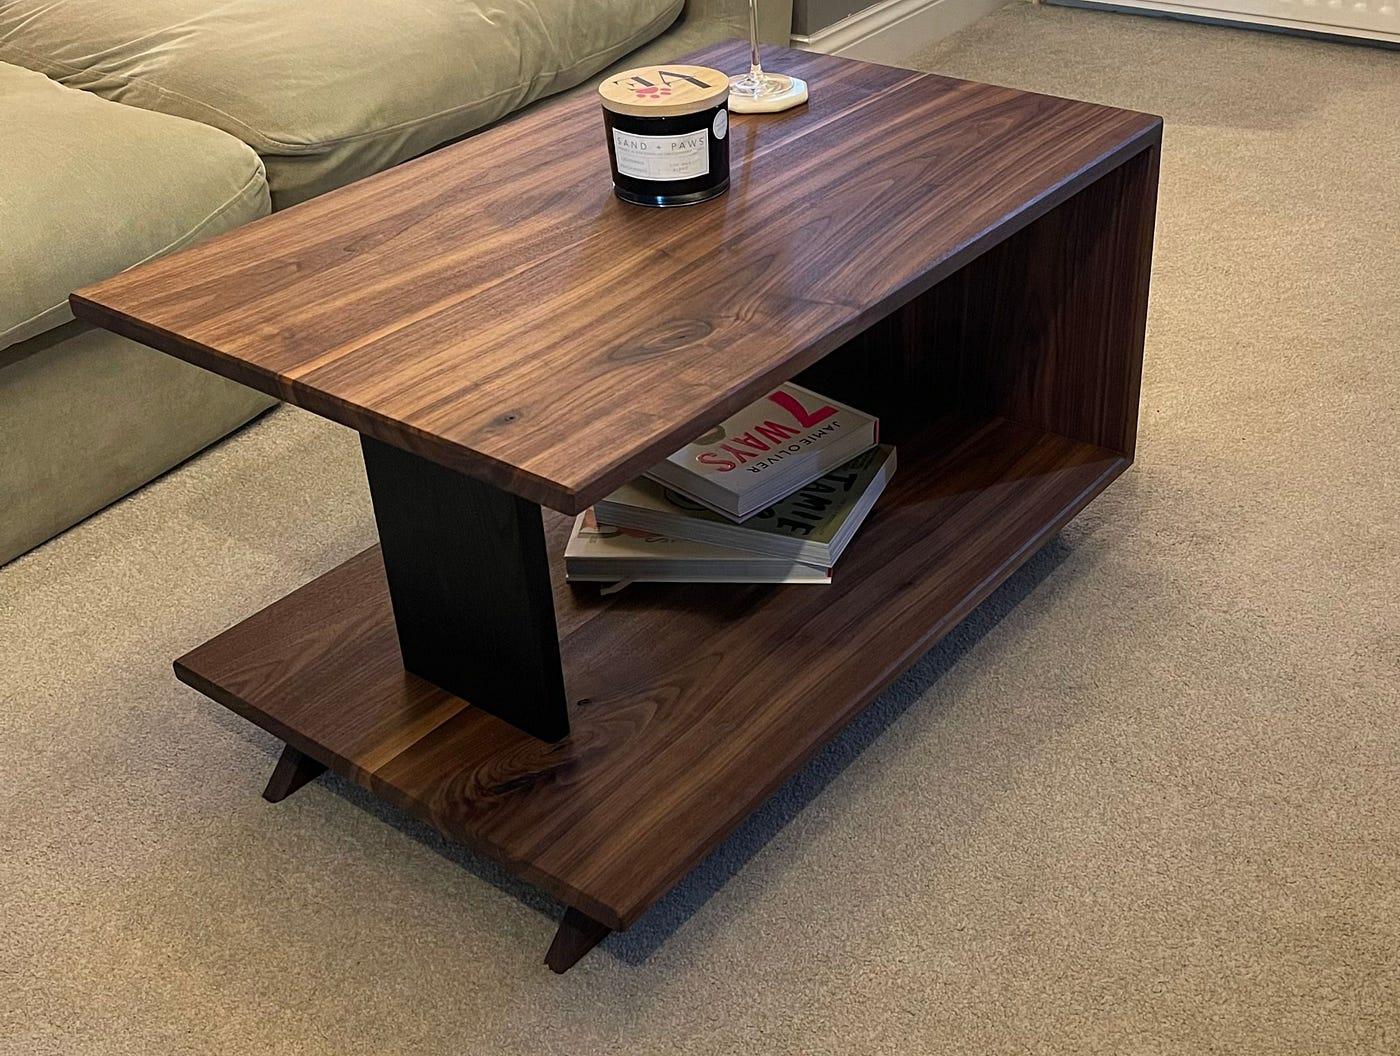 Embrace Natural Beauty: The Timeless Charm of a Timber Coffee Table